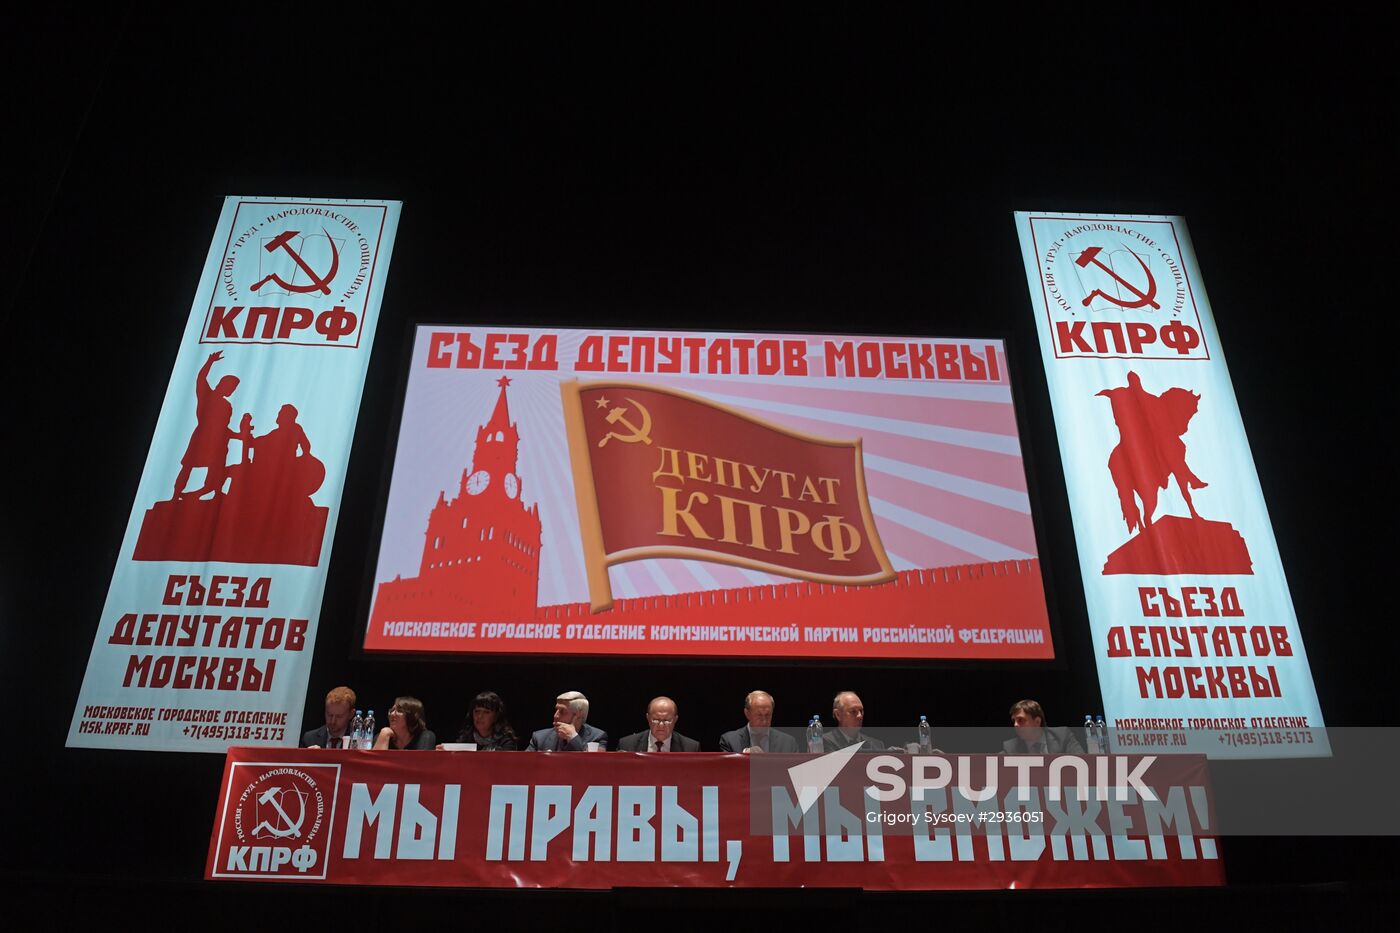 Moscow people's deputies extraordinary conference